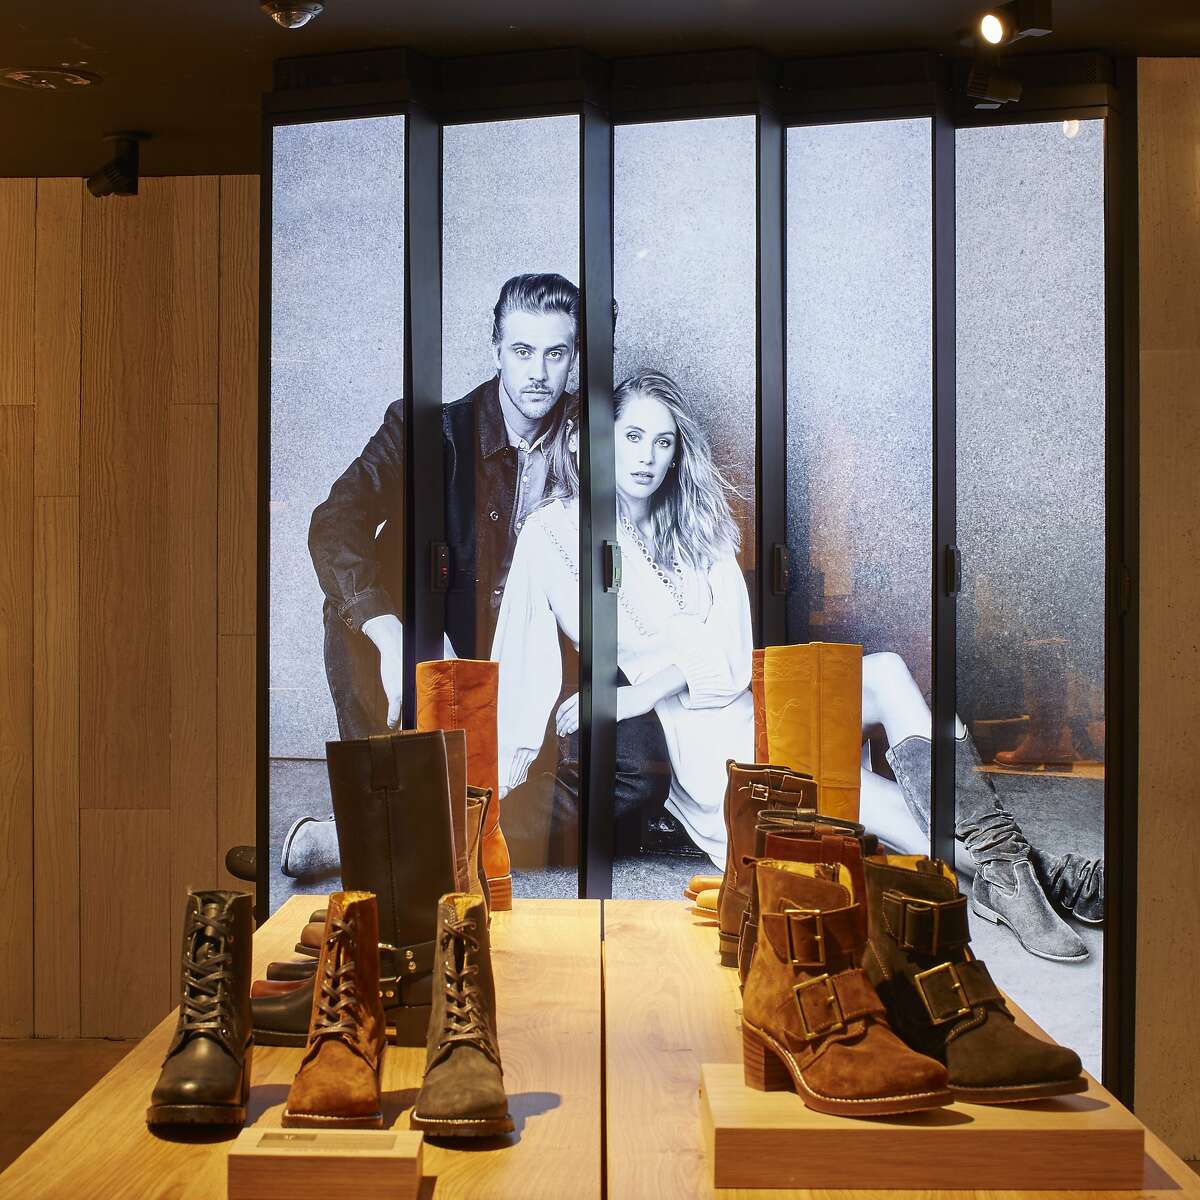 Frye has opened its first Northern California store at 2047 Fillmore St.